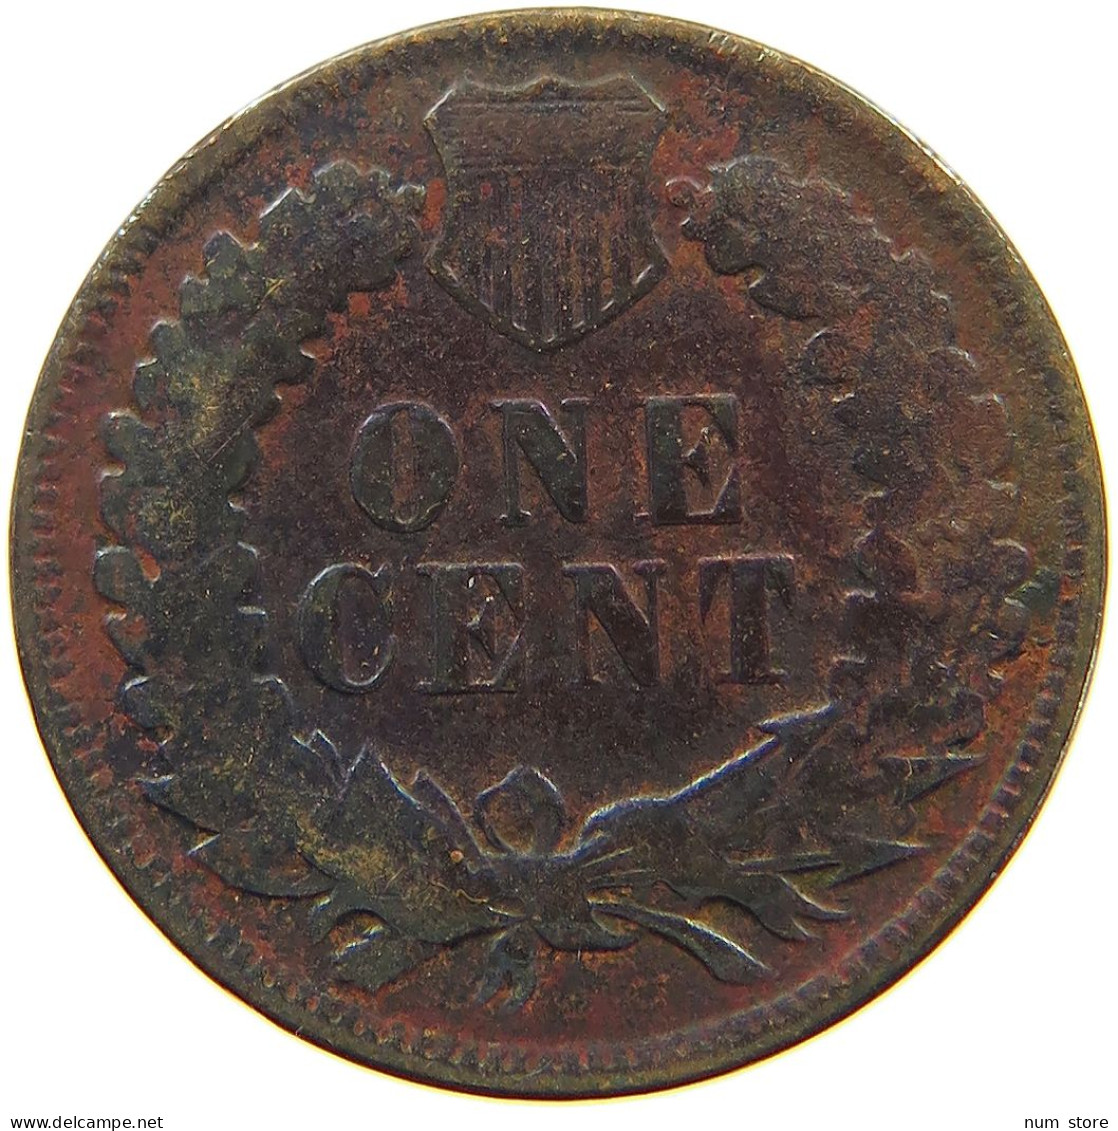 UNITED STATES OF AMERICA CENT 1899 INDIAN HEAD #a096 0011 - 1859-1909: Indian Head